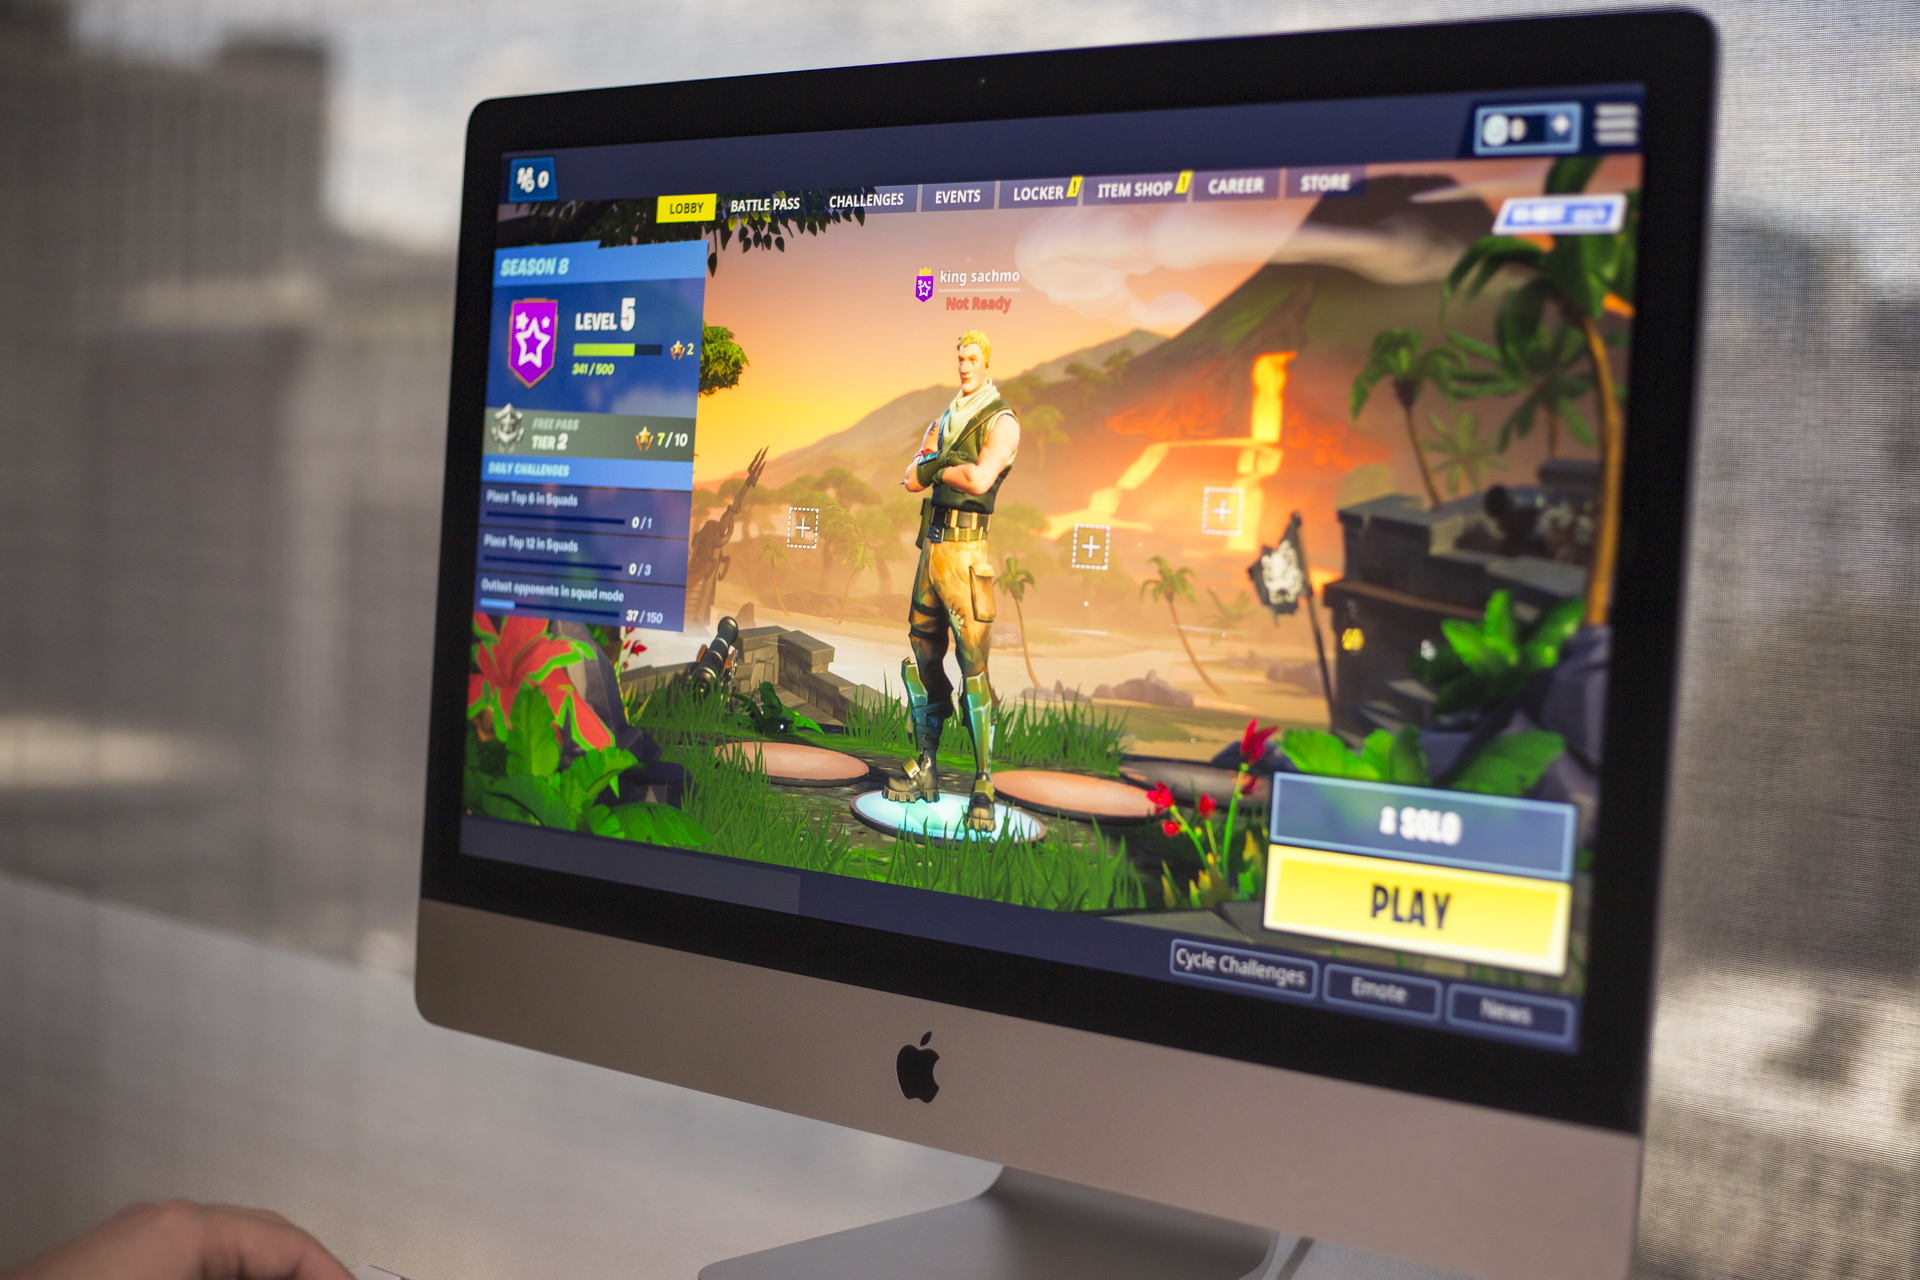 Play games on your Mac - Apple Support (GU)